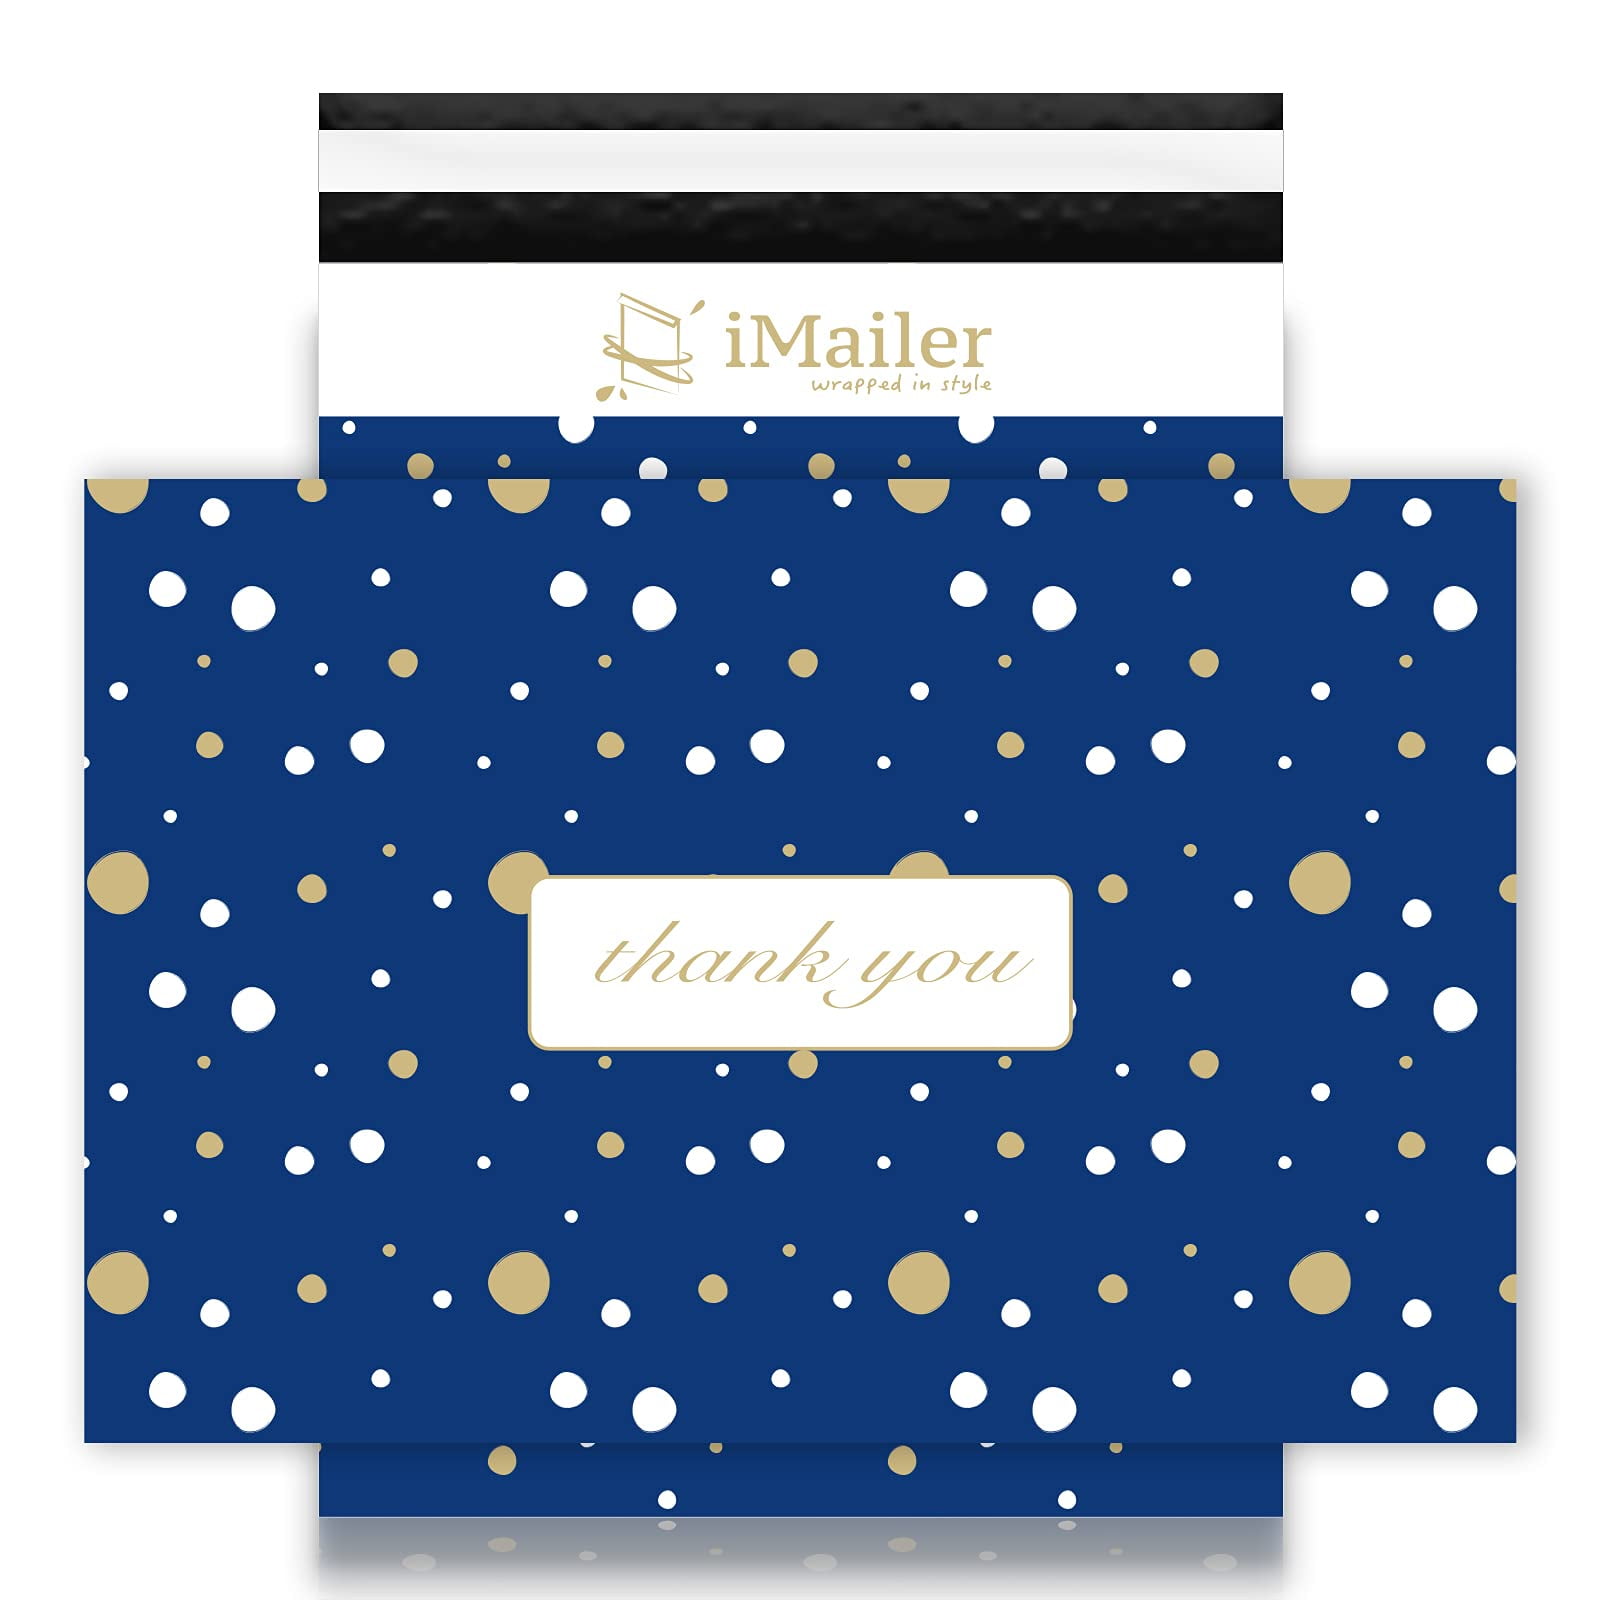 100pcs Poly Mailer Envelope Tropical Leaf Mailing Shipping Package Bags-Self Seal iMailer-12 x 15 